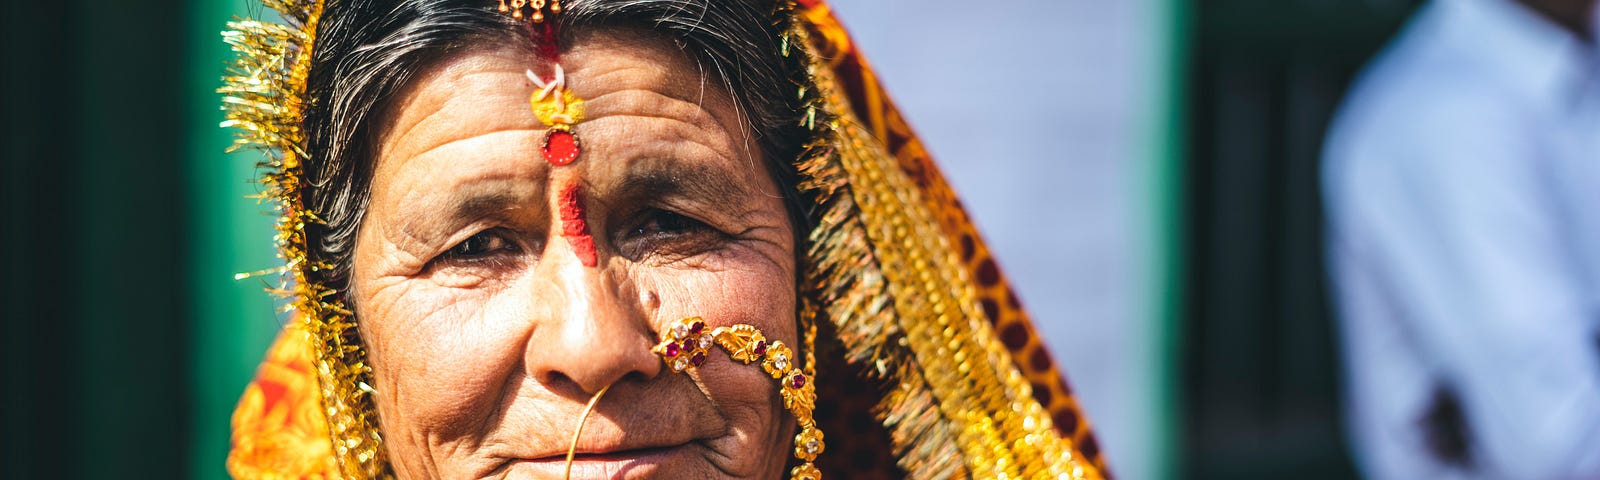 An older woman wearing a large nose-ring, shawl over her head, and a lot of colorful jewelry.